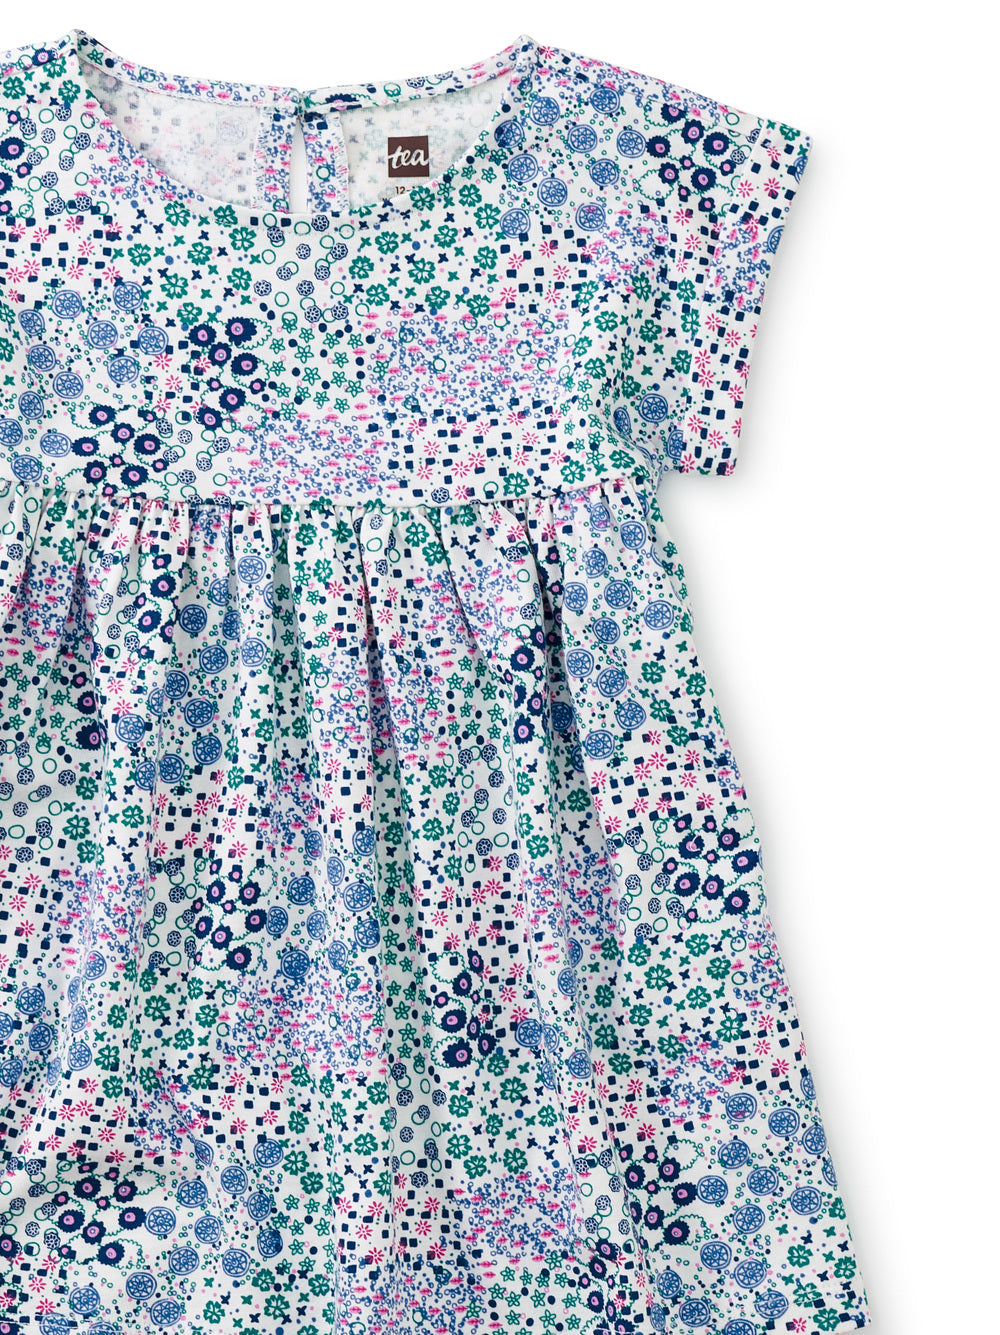 Empire Baby Dress - Floral Patch